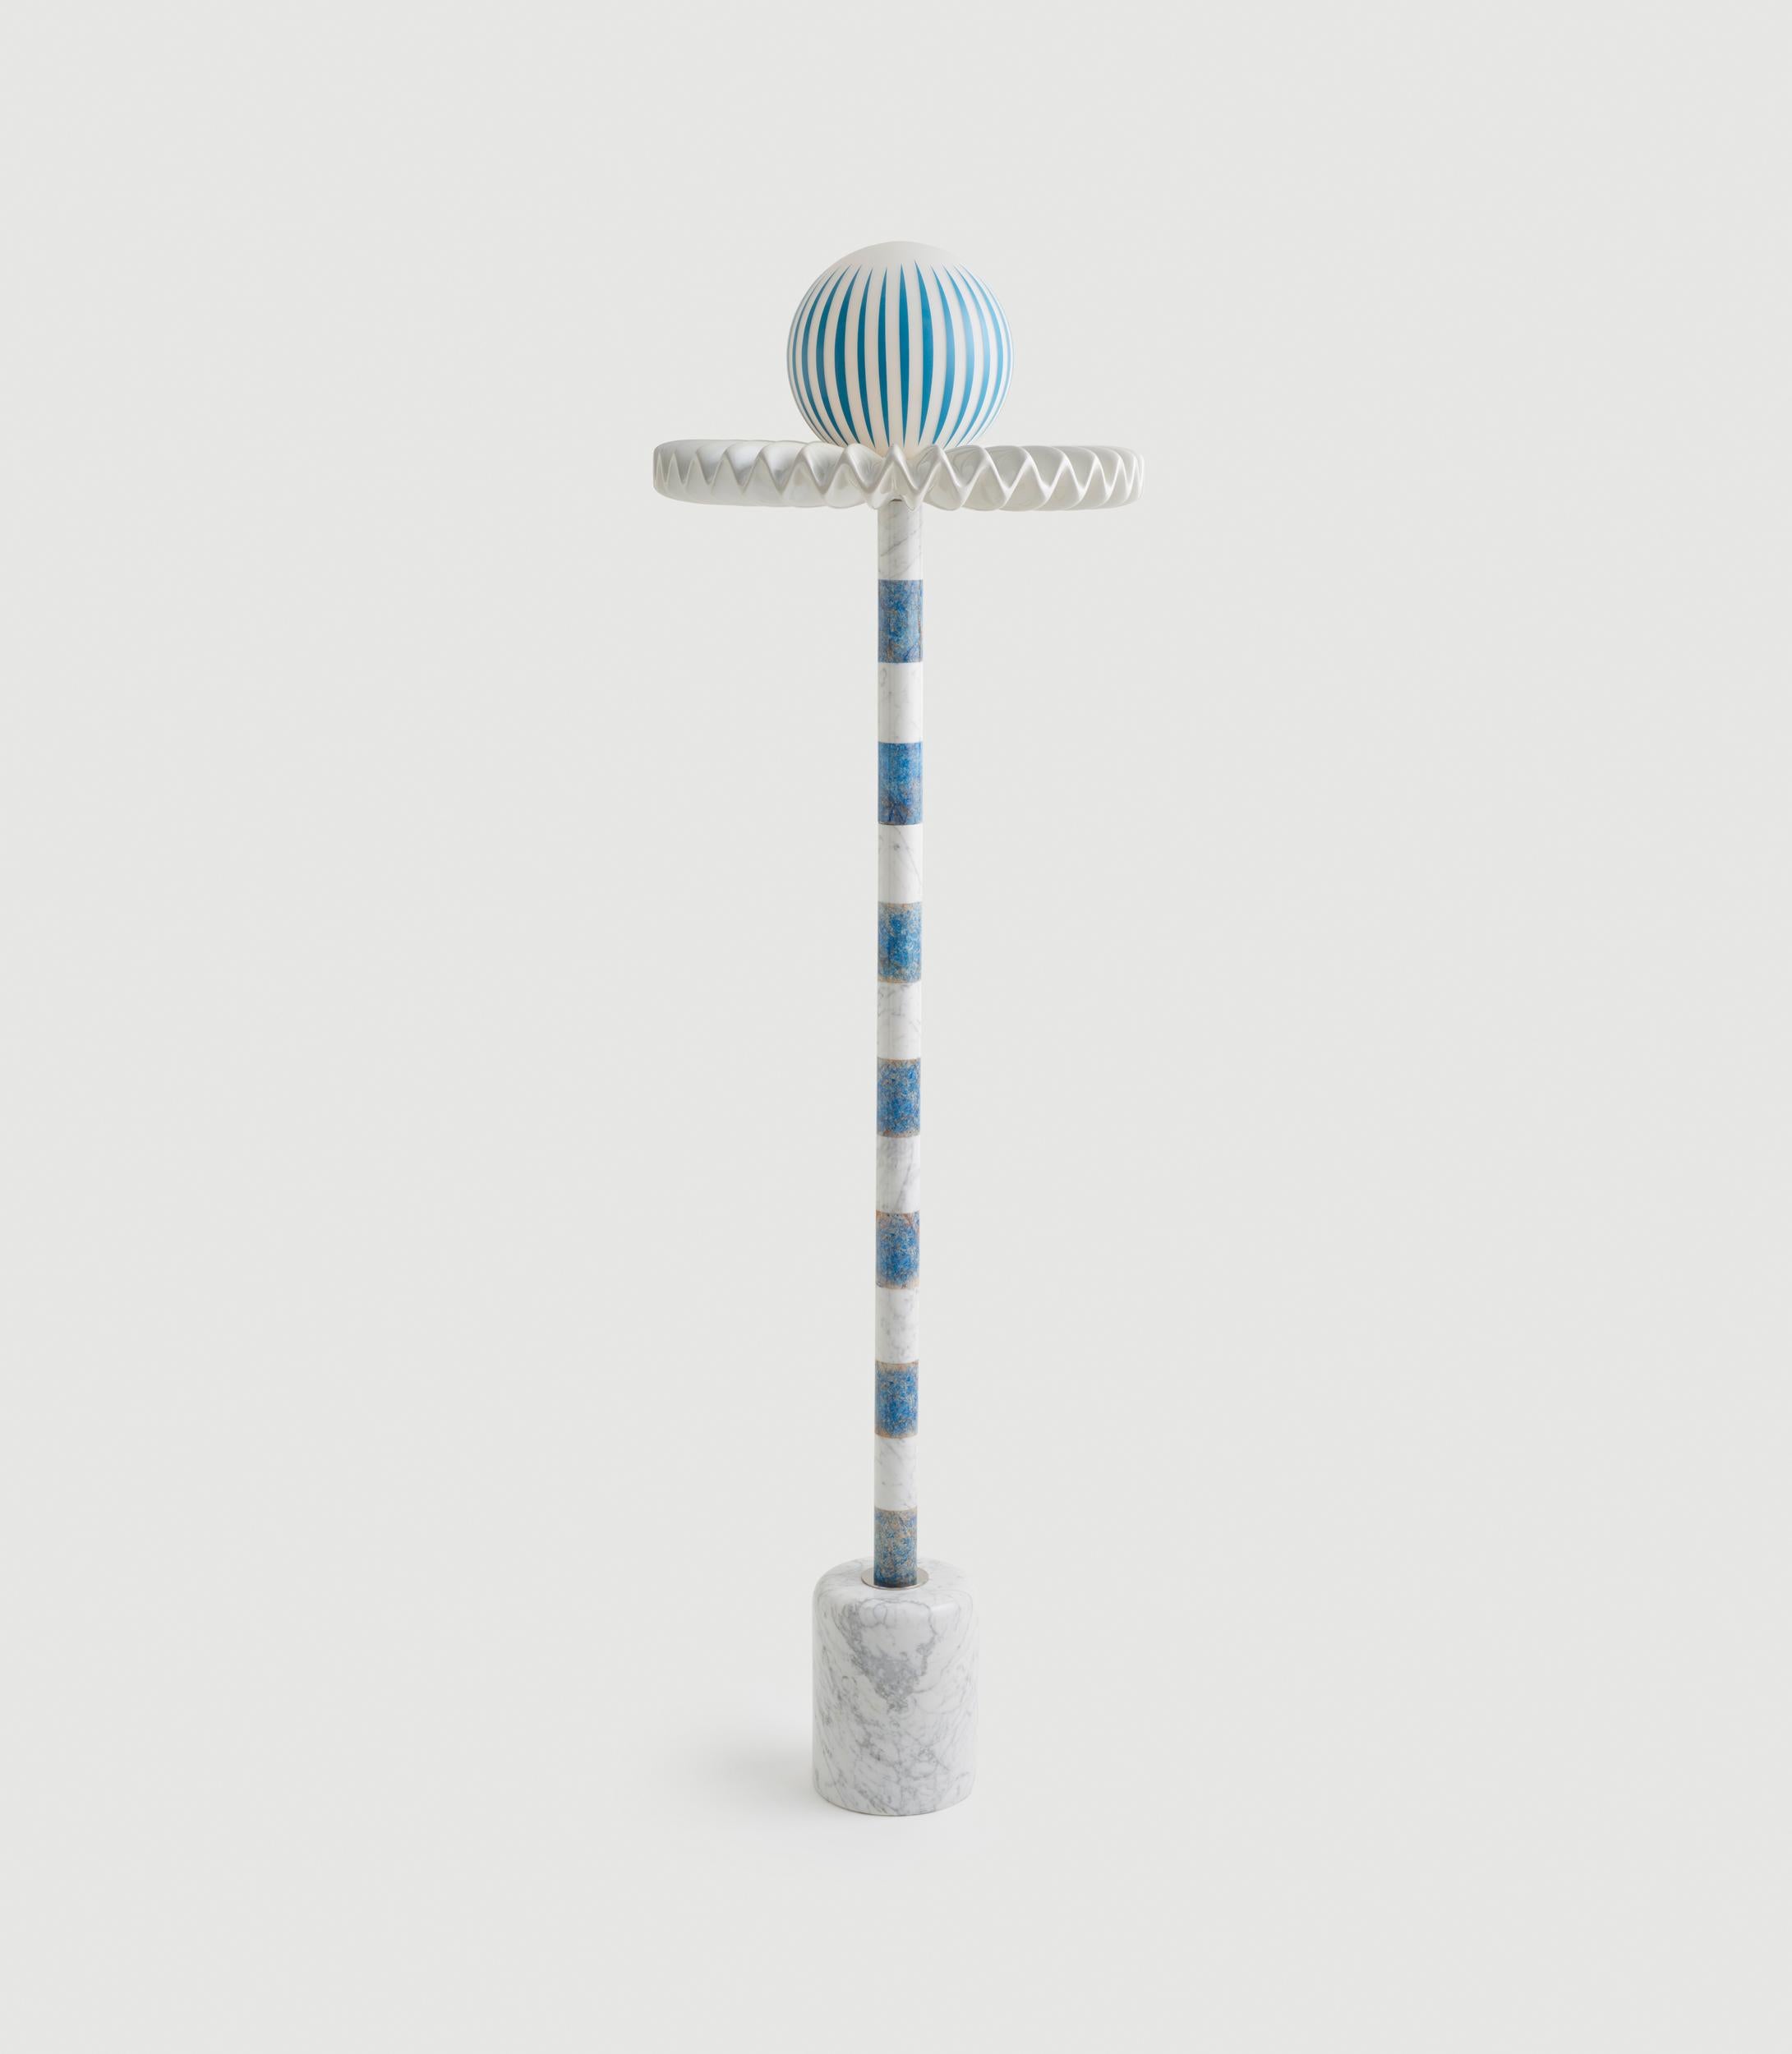 “Sare” is a floor lamp inspired by the 17th Century ruff collar which was a symbol of wealth and status. It also resembles the silent clown “Pierrot” with it’s striped marble body and round glass head. Sare is handcrafted and assembled with